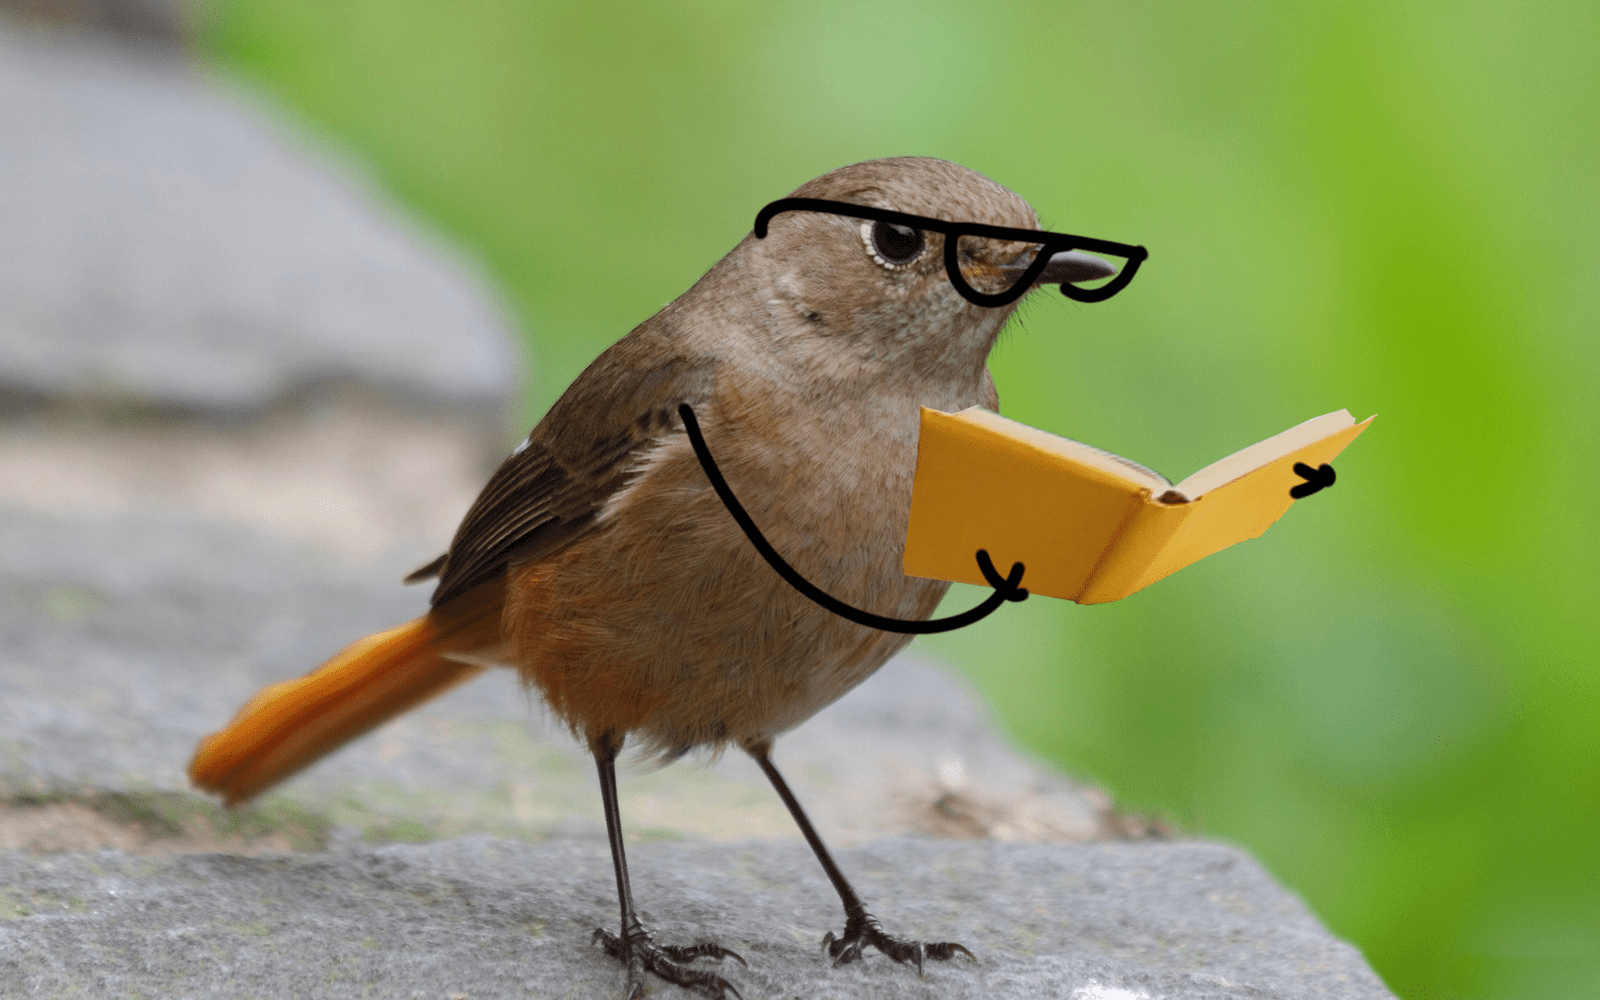 25 Hilarious Photos Of Birds With Arms That Will Make You Lol Bouncy 0510